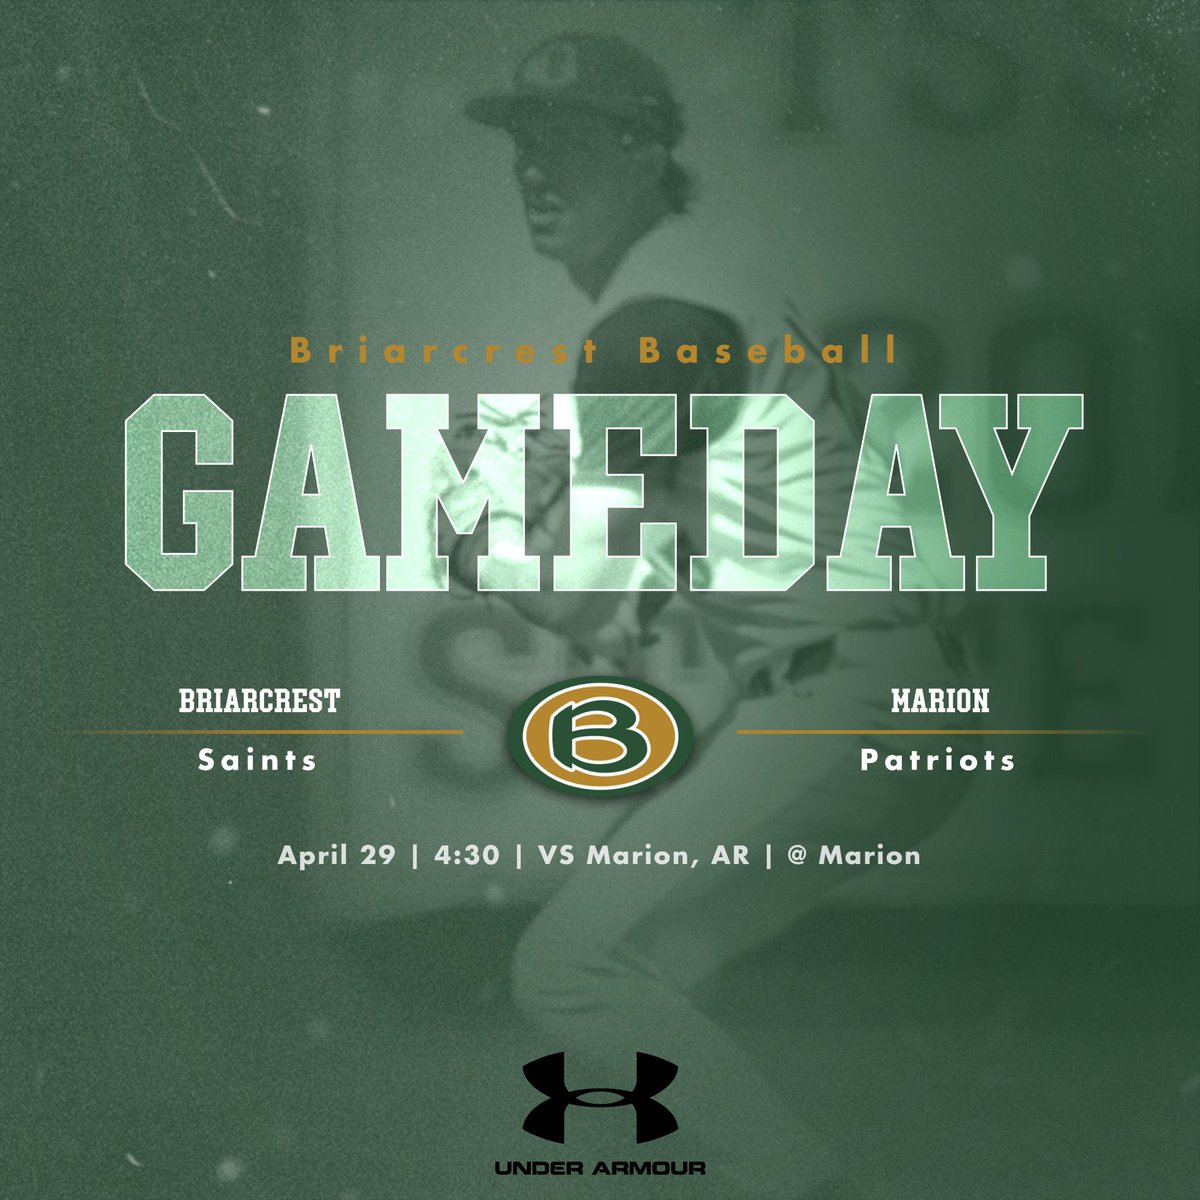 ITS SAINTS BASEBALL GAMEDAY!!! The Saints will look to finish the regular season with a W as they face Marion today at 4:30!